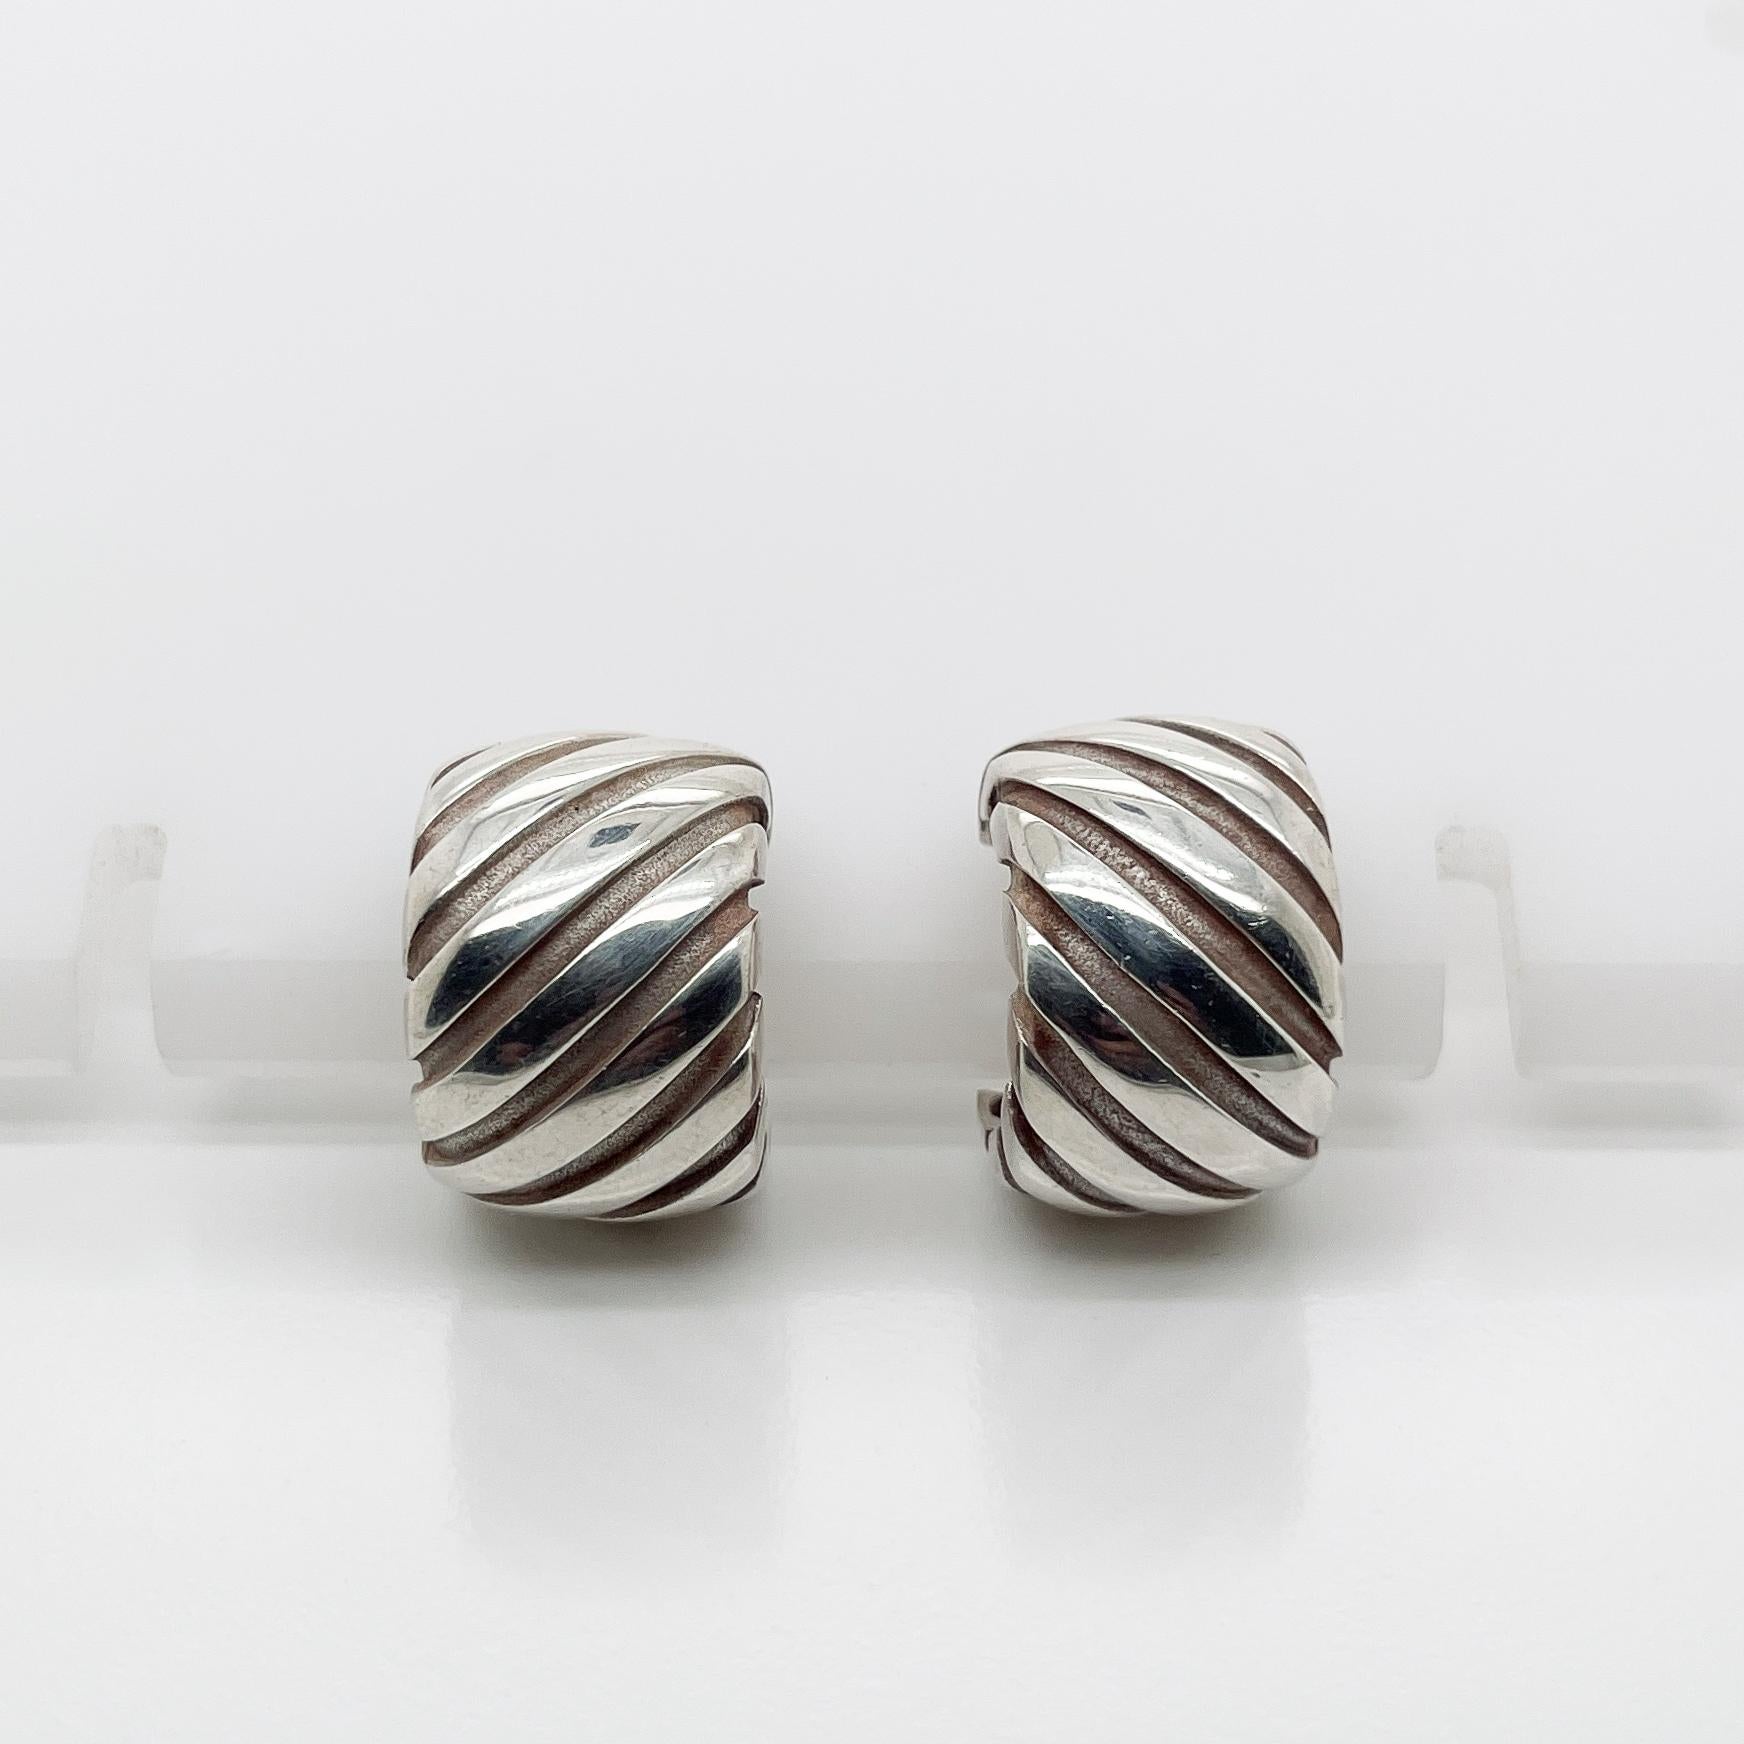 A very fine pair of 'Atlas' Groove Stripe clip-on earrings.

In sterling silver.

By Tiffany & Co.

Simply a wonderful pair of earrings from Tiffany!

Date:
20th Century

Overall Condition:
It is in overall good, as-pictured, used estate condition